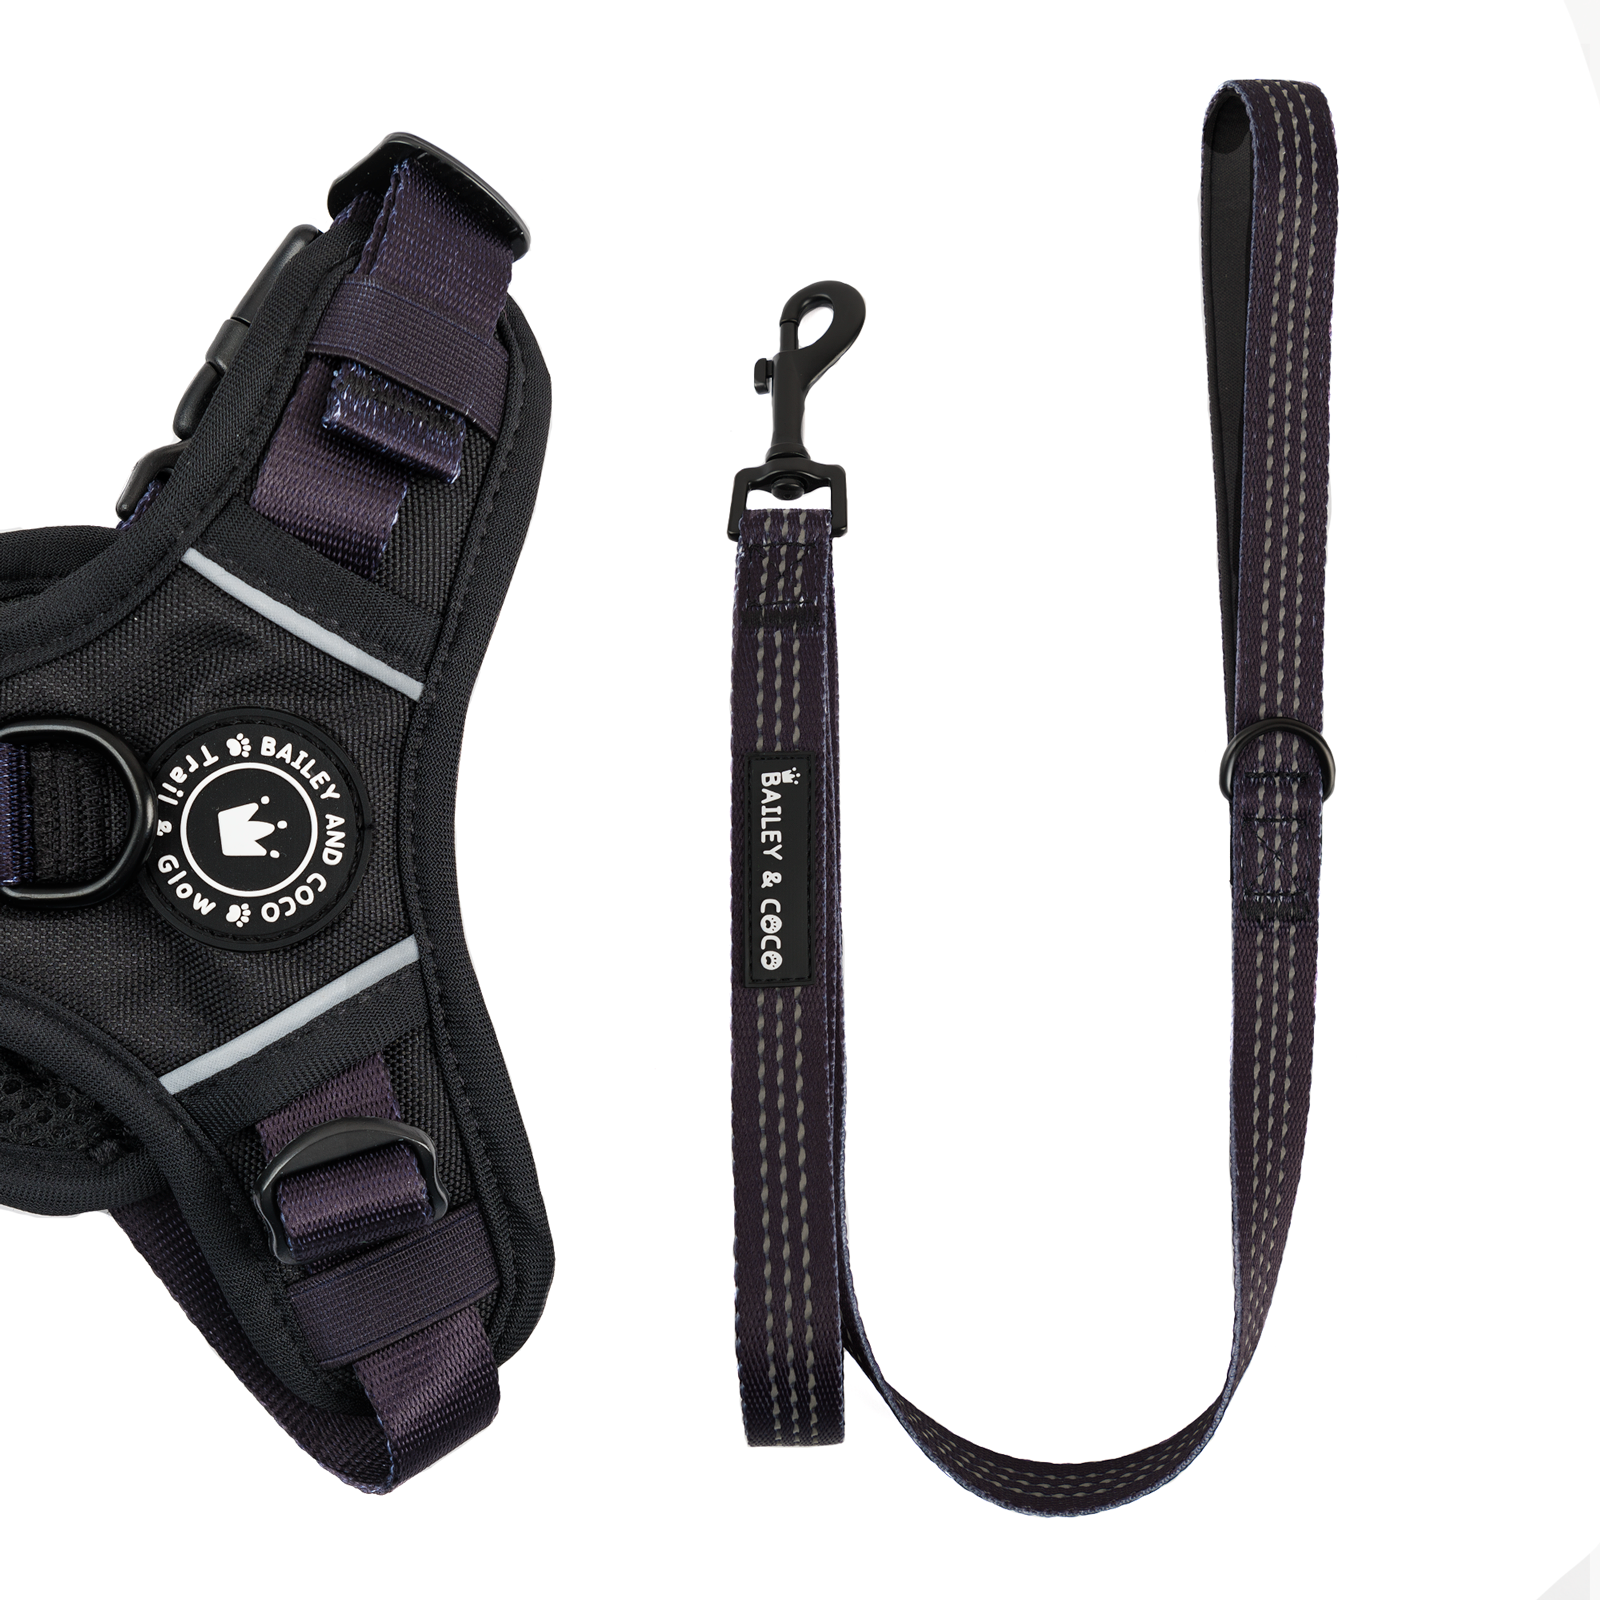 Trail & Glow® Fabric Dog Lead 5ft - The Jet Black One.